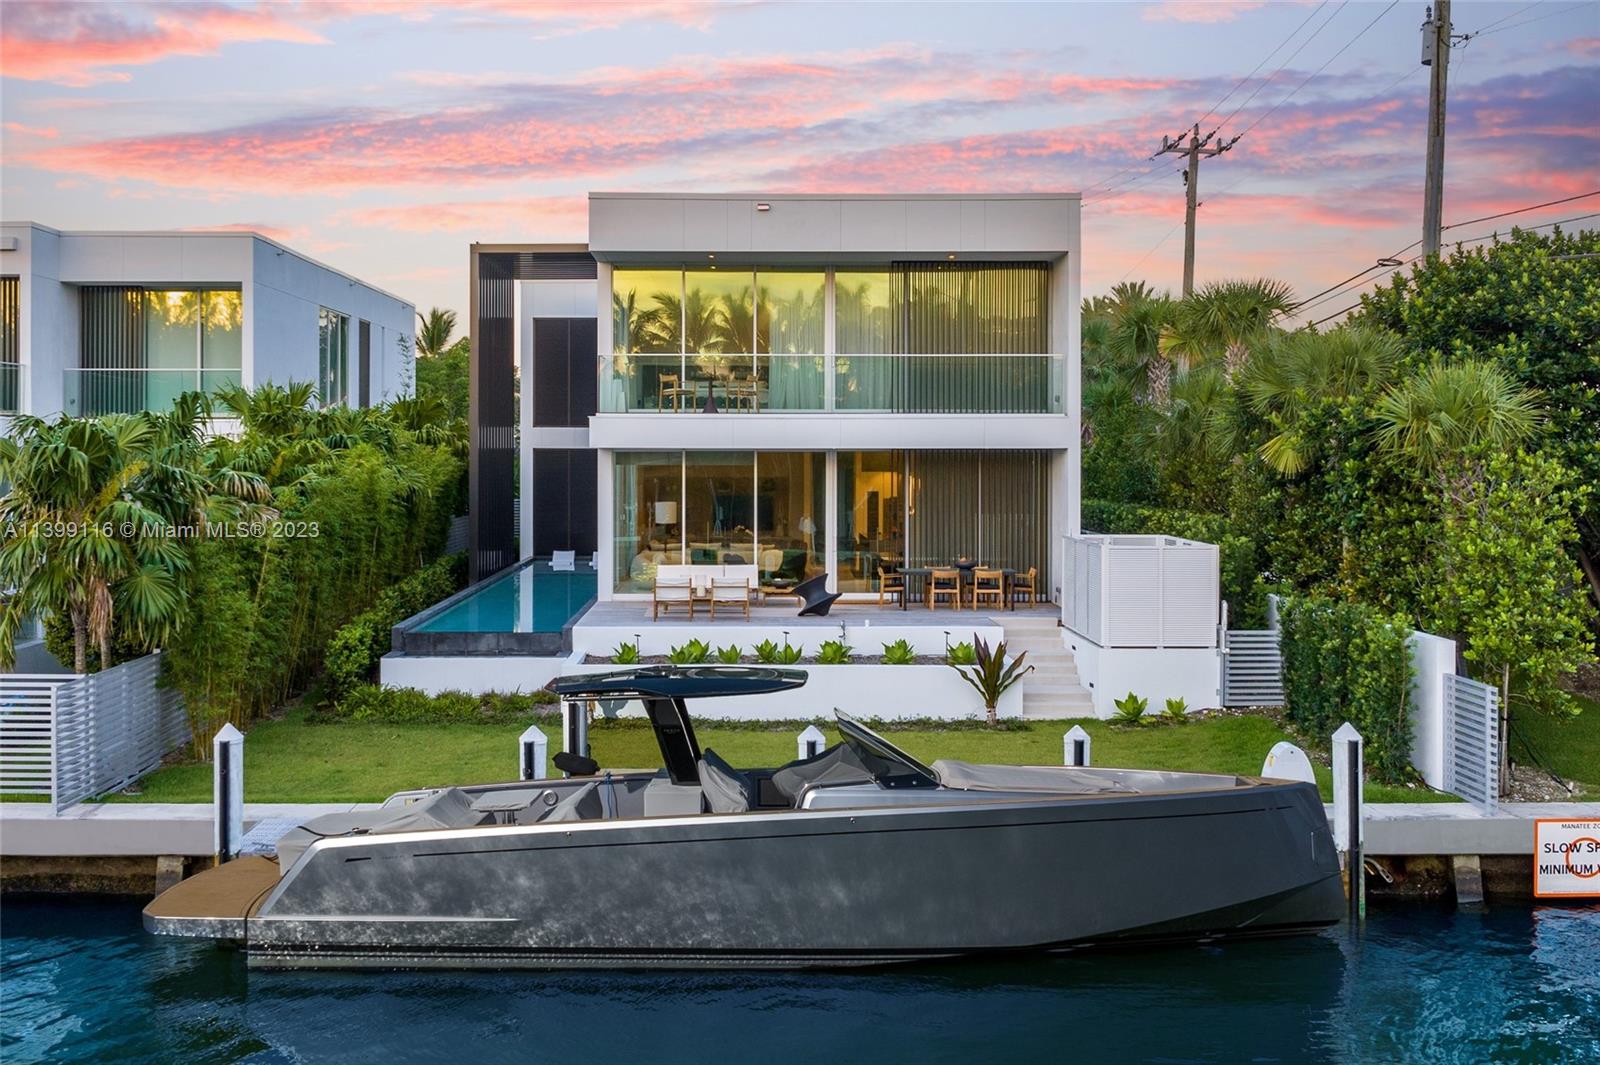 Experience the ultimate waterfront luxury at the Ritz Carlton Residences in Miami Beach. This exclusive two-story villa, crafted by the renowned Piero Lissoni, seamlessly combines the allure of a luxury hotel with the charm of modern tropical living. Its contemporary design features Georgette Select Limestone floors, wood floors, Boffi cabinetry, Gaggenau appliances, Ipe hardwood decking, Fantini faucets, and a gas generator. Nestled alongside Surprise Lake and offering access from your private dock to Biscayne Bay, the Intracoastal Waterway, and the Atlantic Ocean, this residence presents an ideal retreat that harmonizes the best of both worlds, the privacy and independence of your sanctuary while relishing in the world-class amenities and impeccable services provided by The Ritz-Carlton.